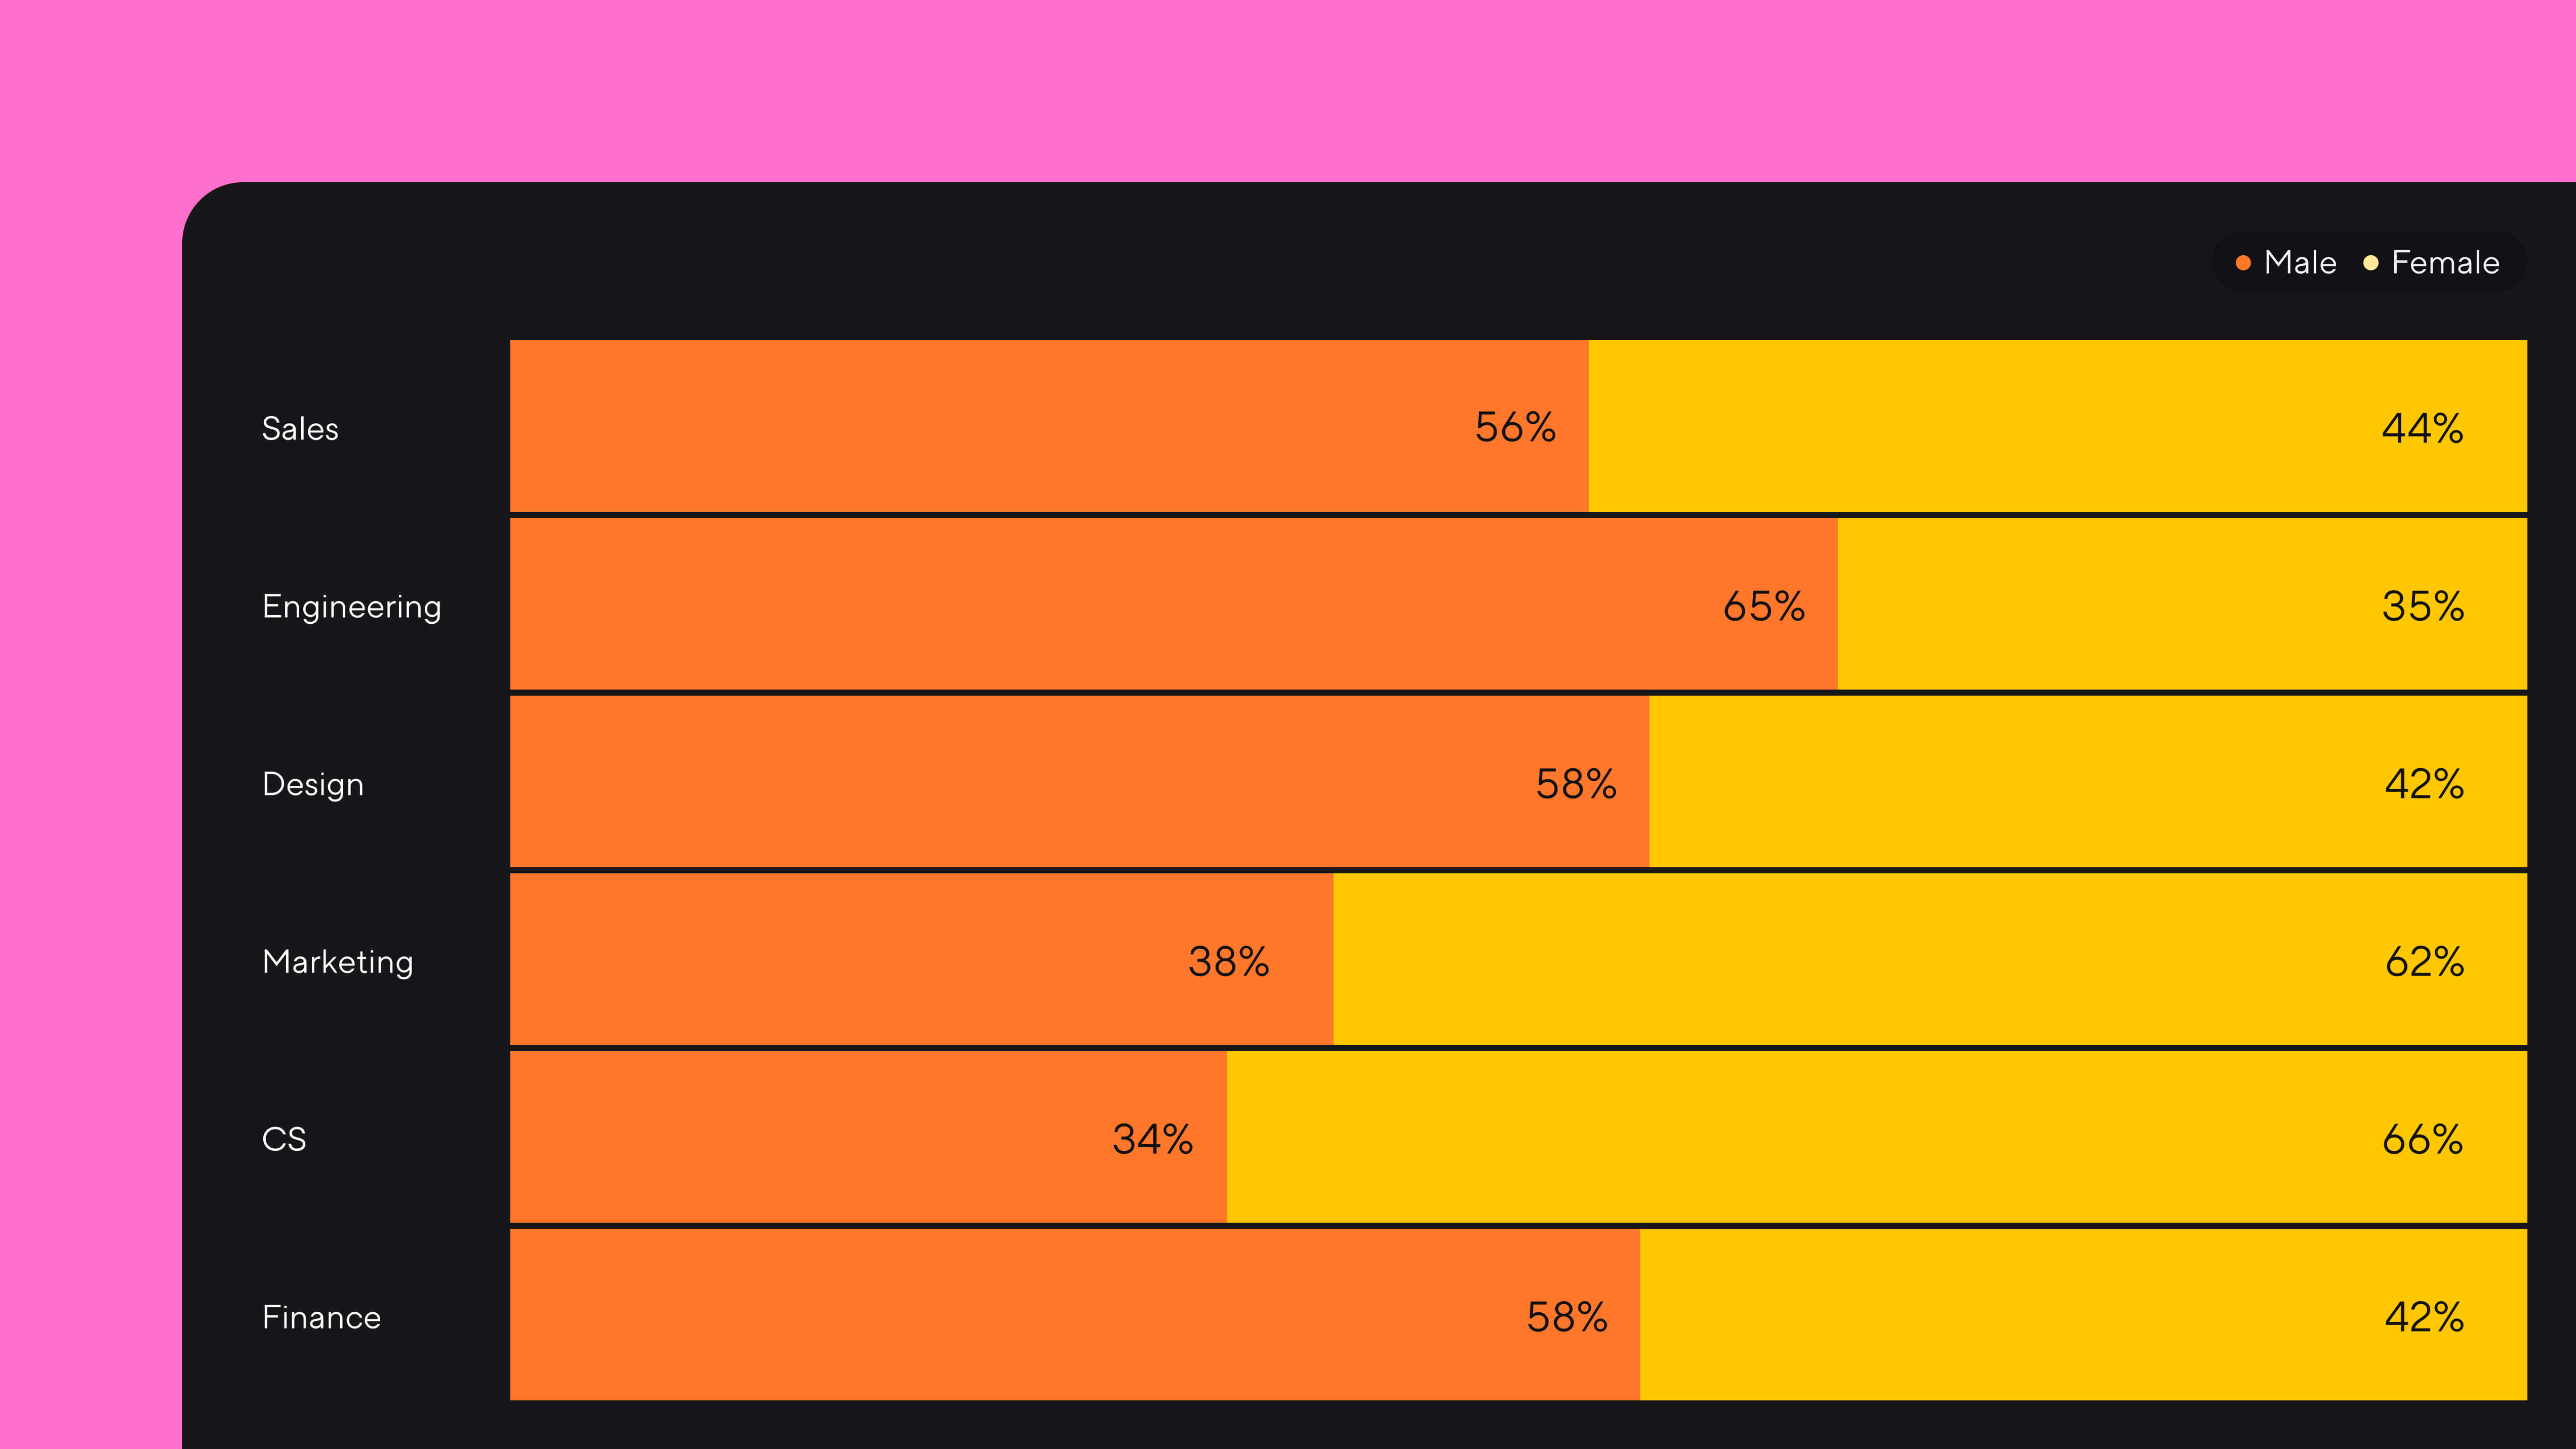 Dandi's new horizontal bar charts. We see male and female representation across six different departments—sales, engineering, design, marketing, CS, finance. Males are represented by orange, females by yellow. The whole graph is set against a bright pink background.